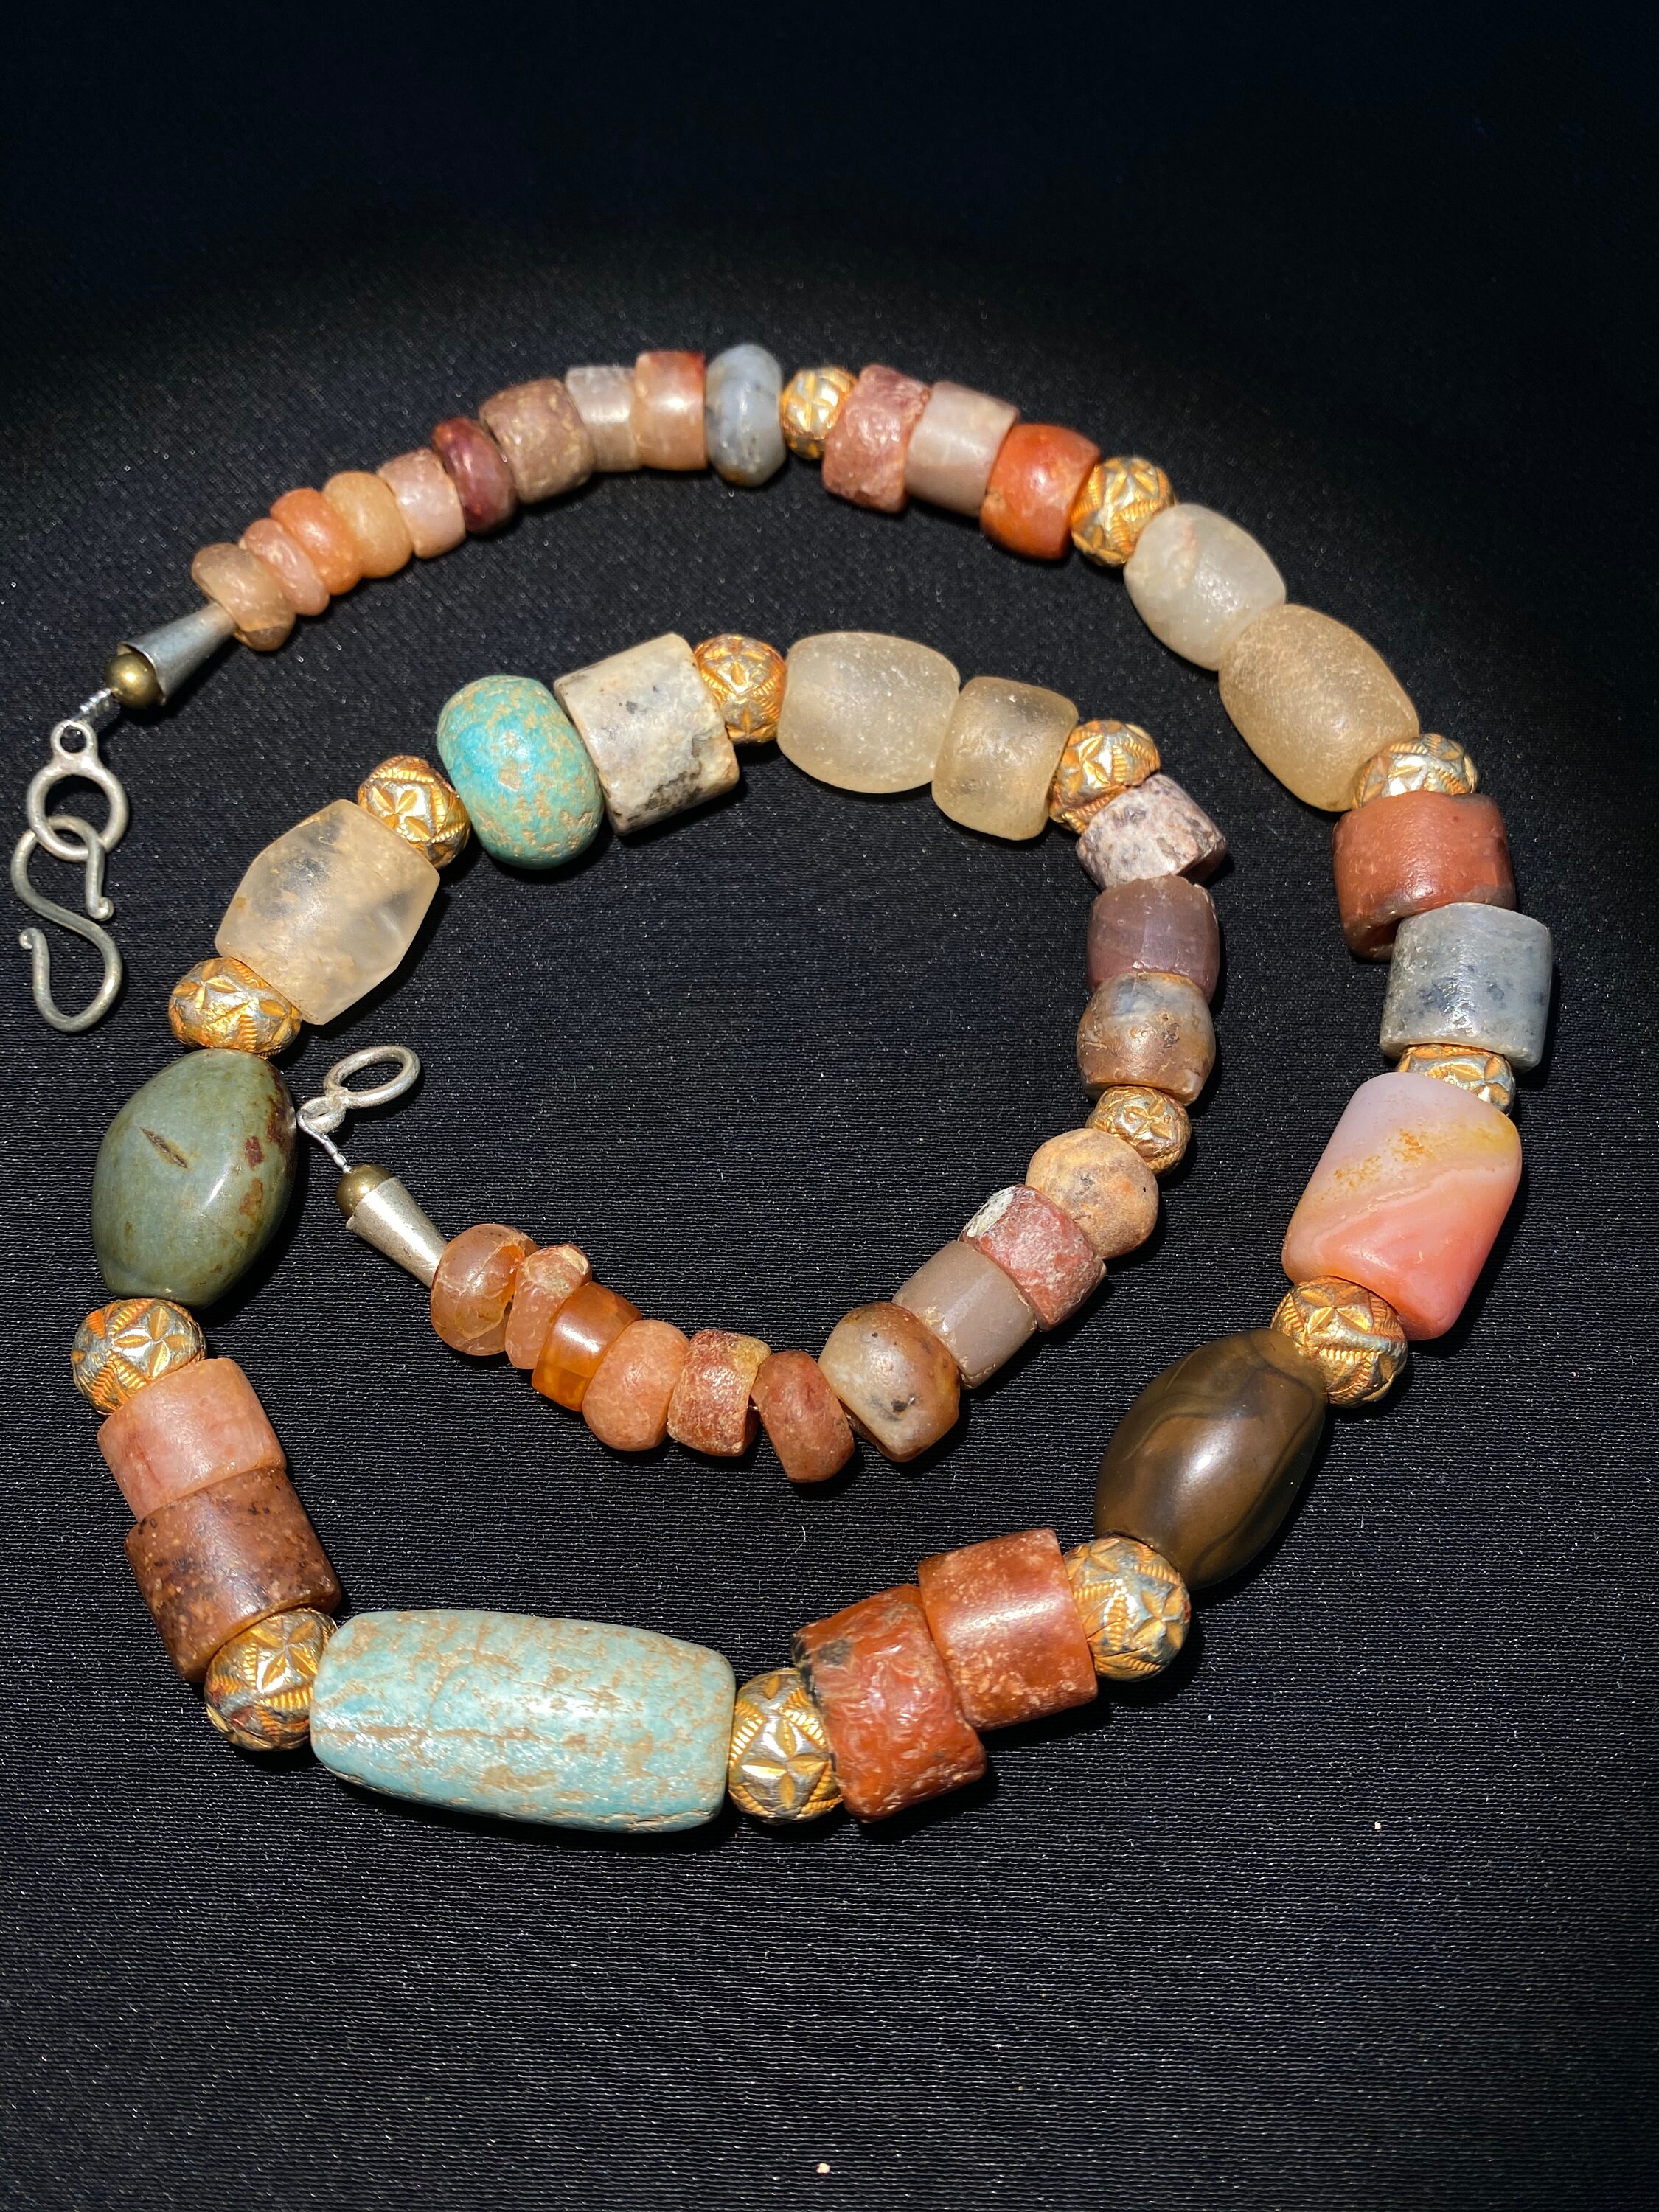 Ancient Carnelian Jewelry Agate Old Beads Necklace Neolithic - Etsy UK